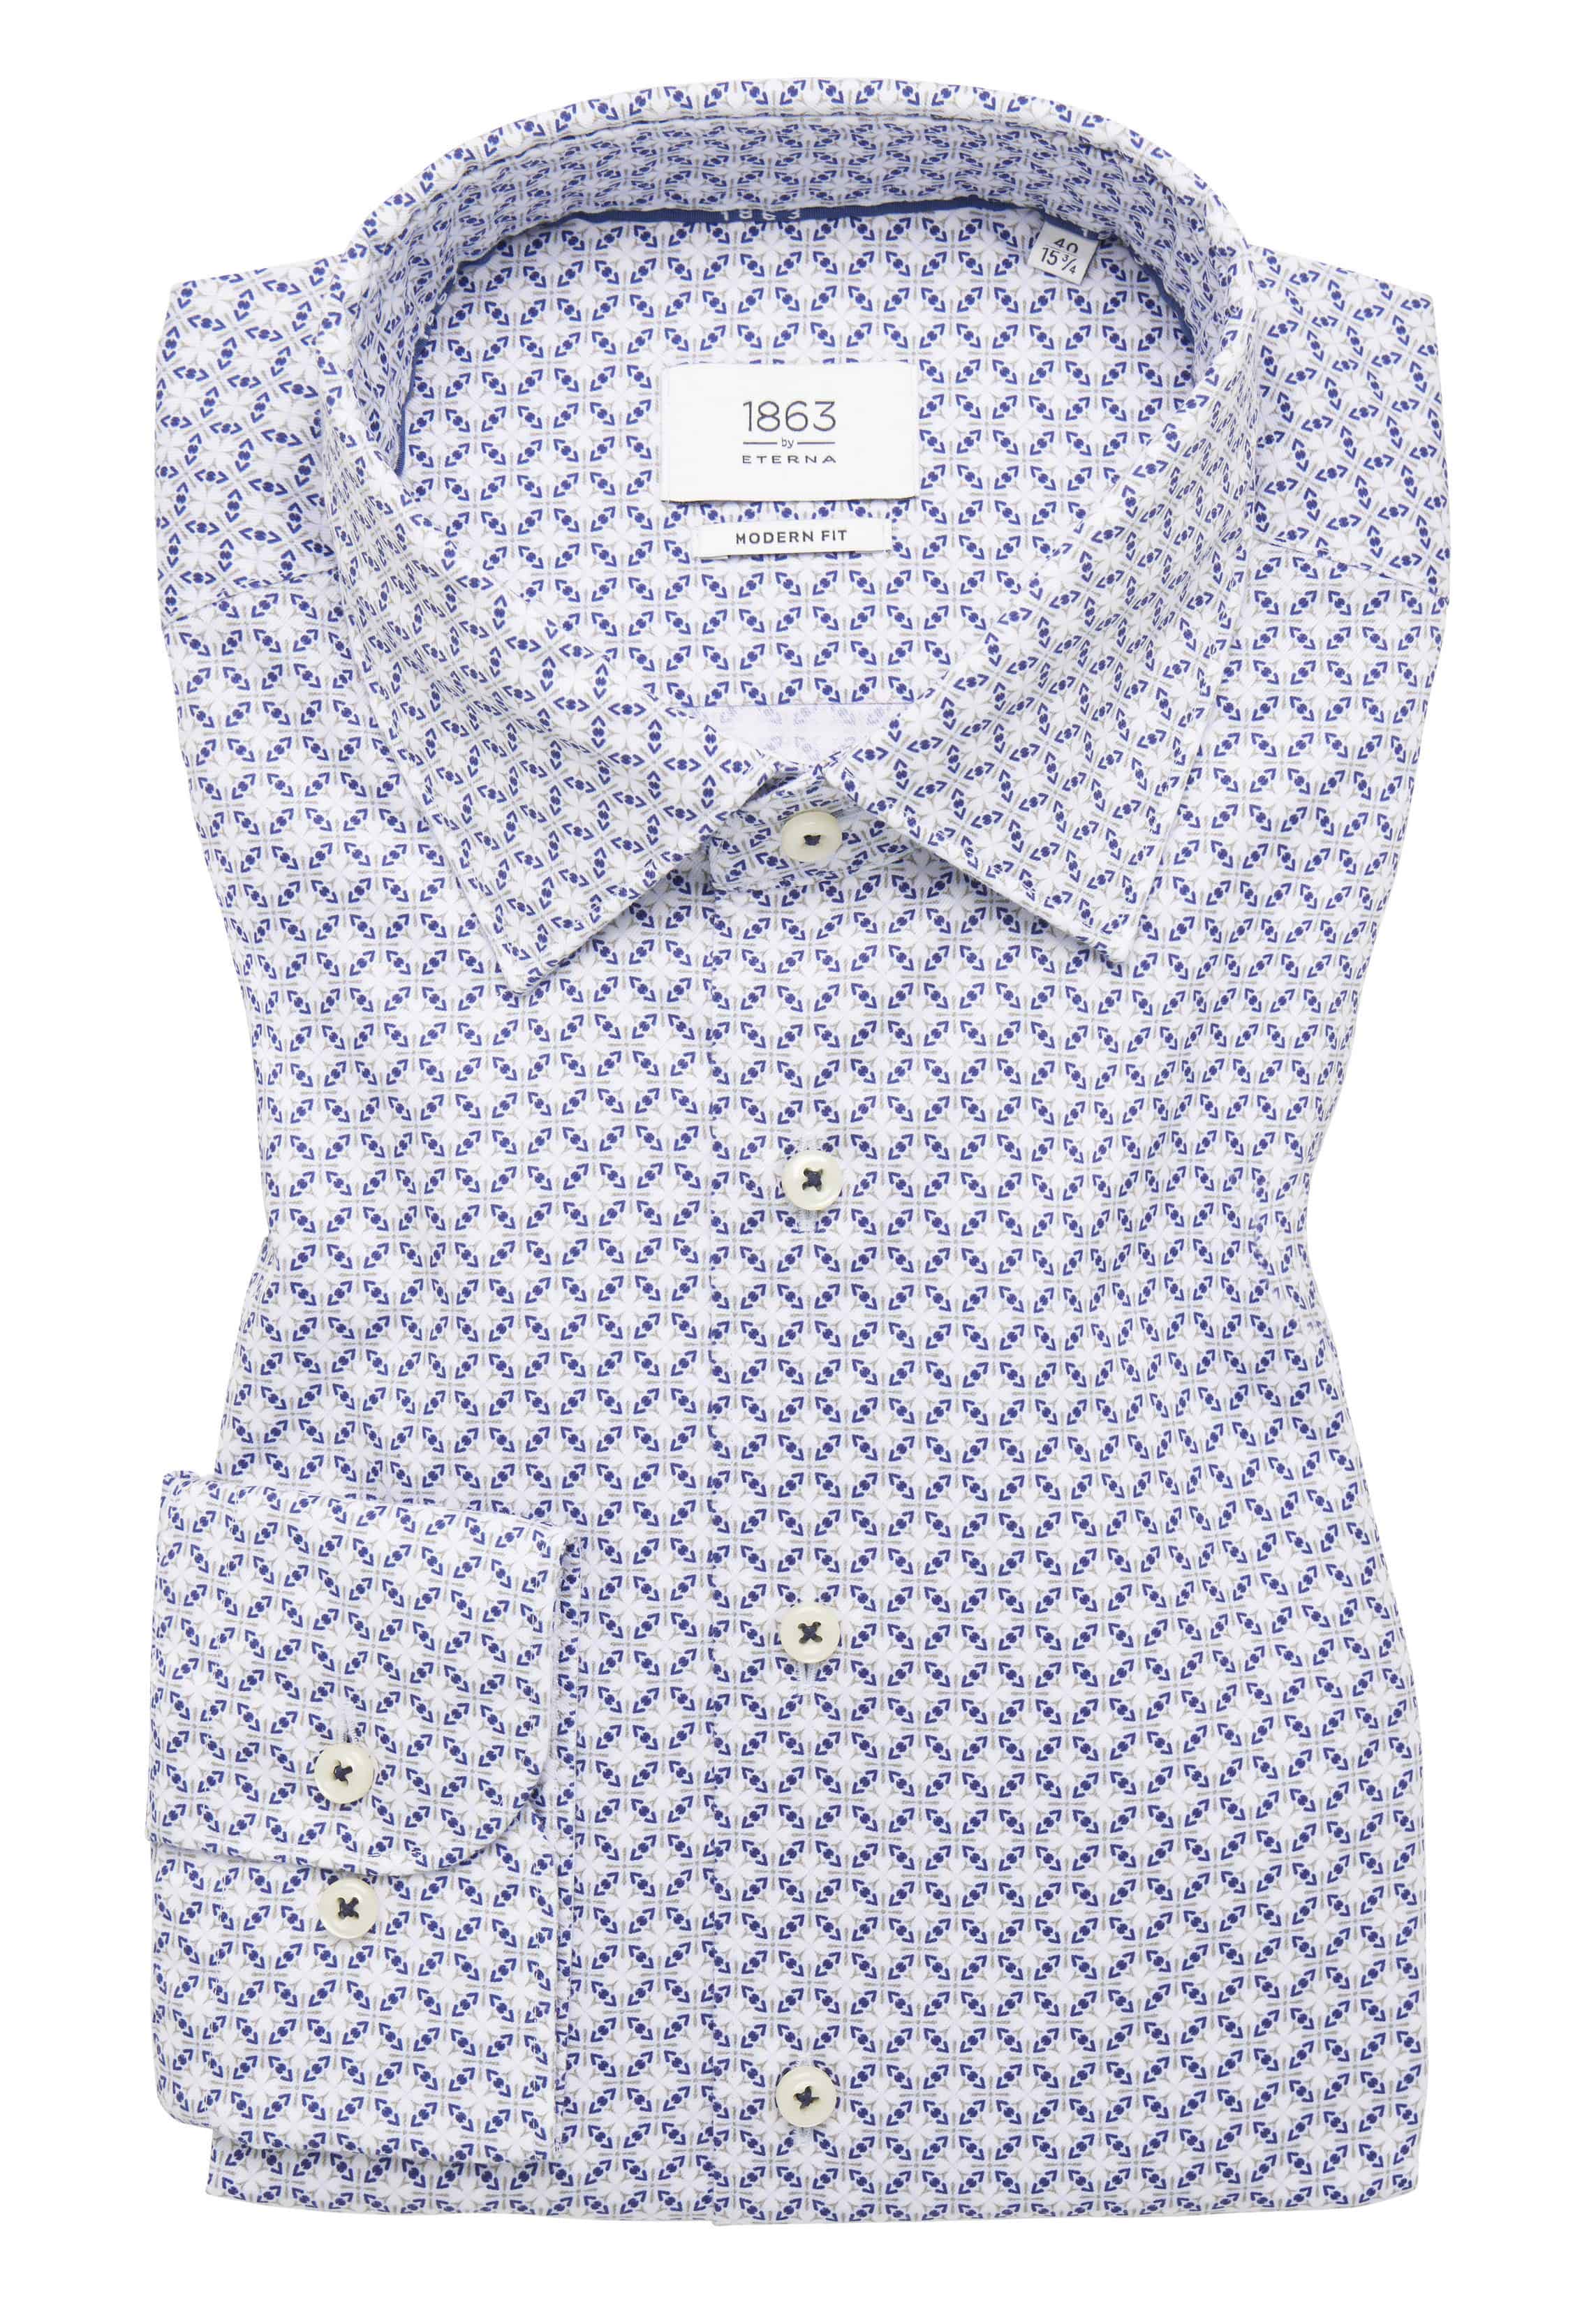 MODERN FIT Shirt in blue printed